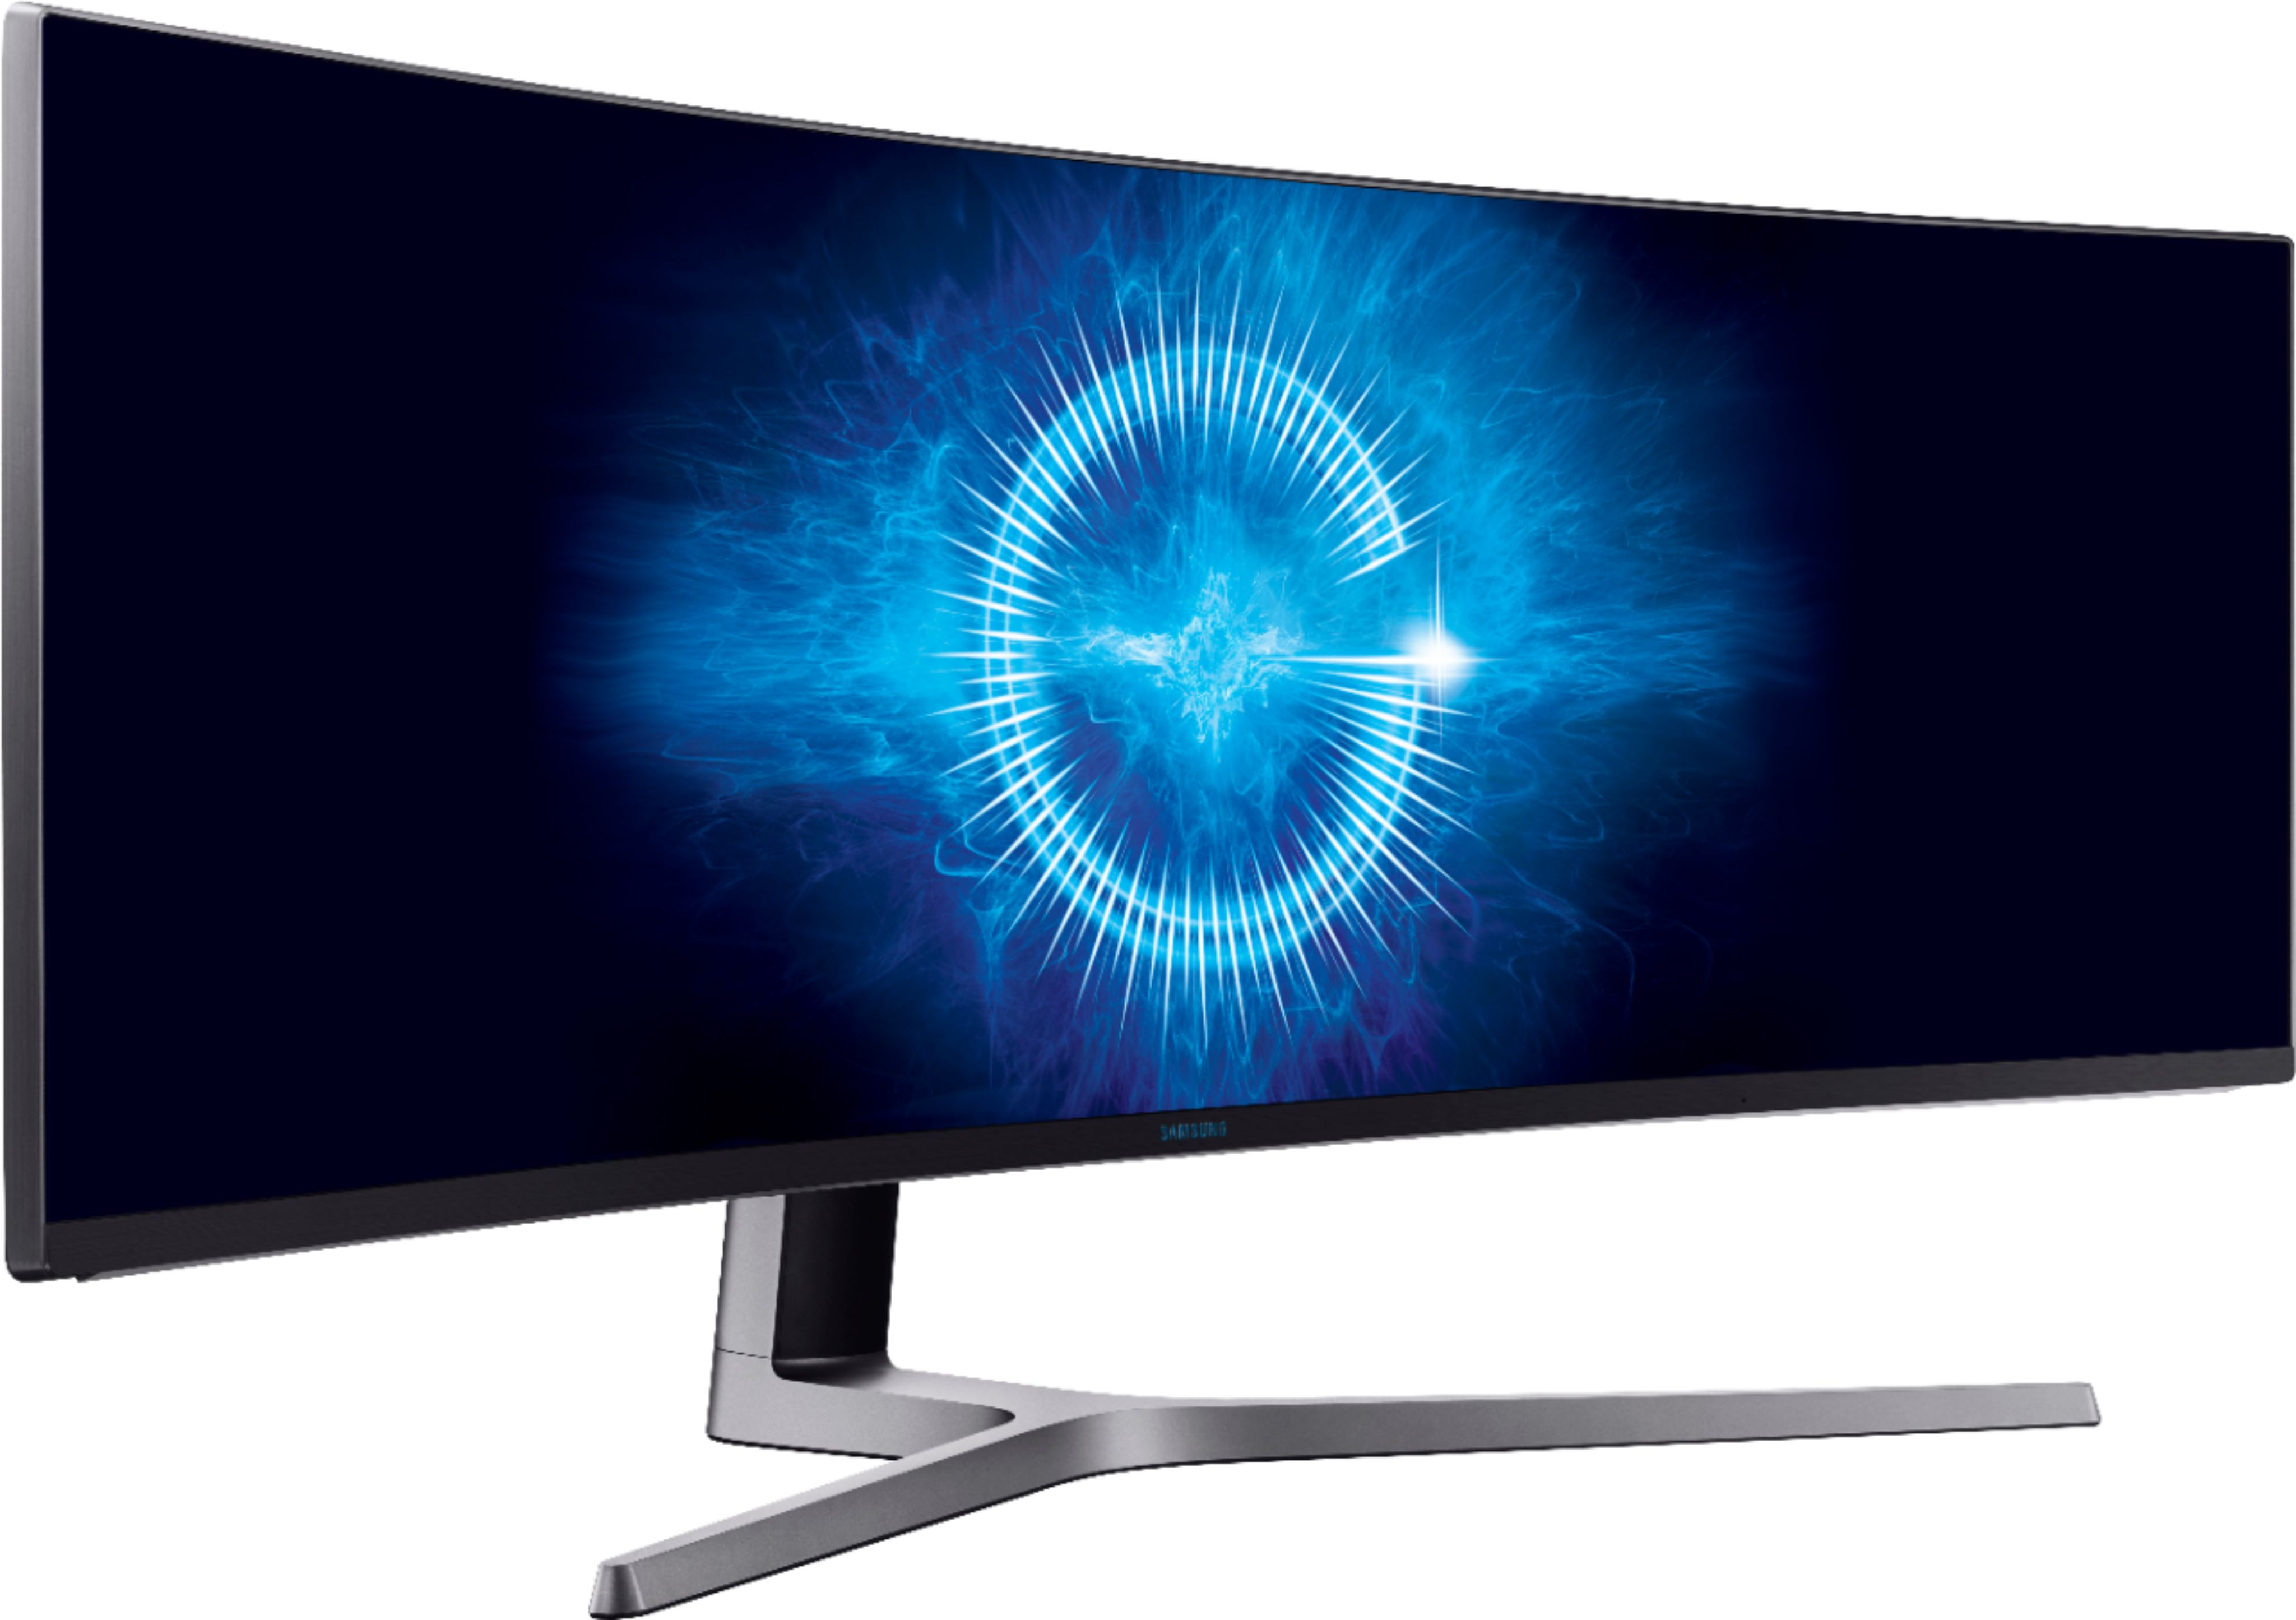 Lenovo joins the 49-inch monitor club at CES 2019 - CNET